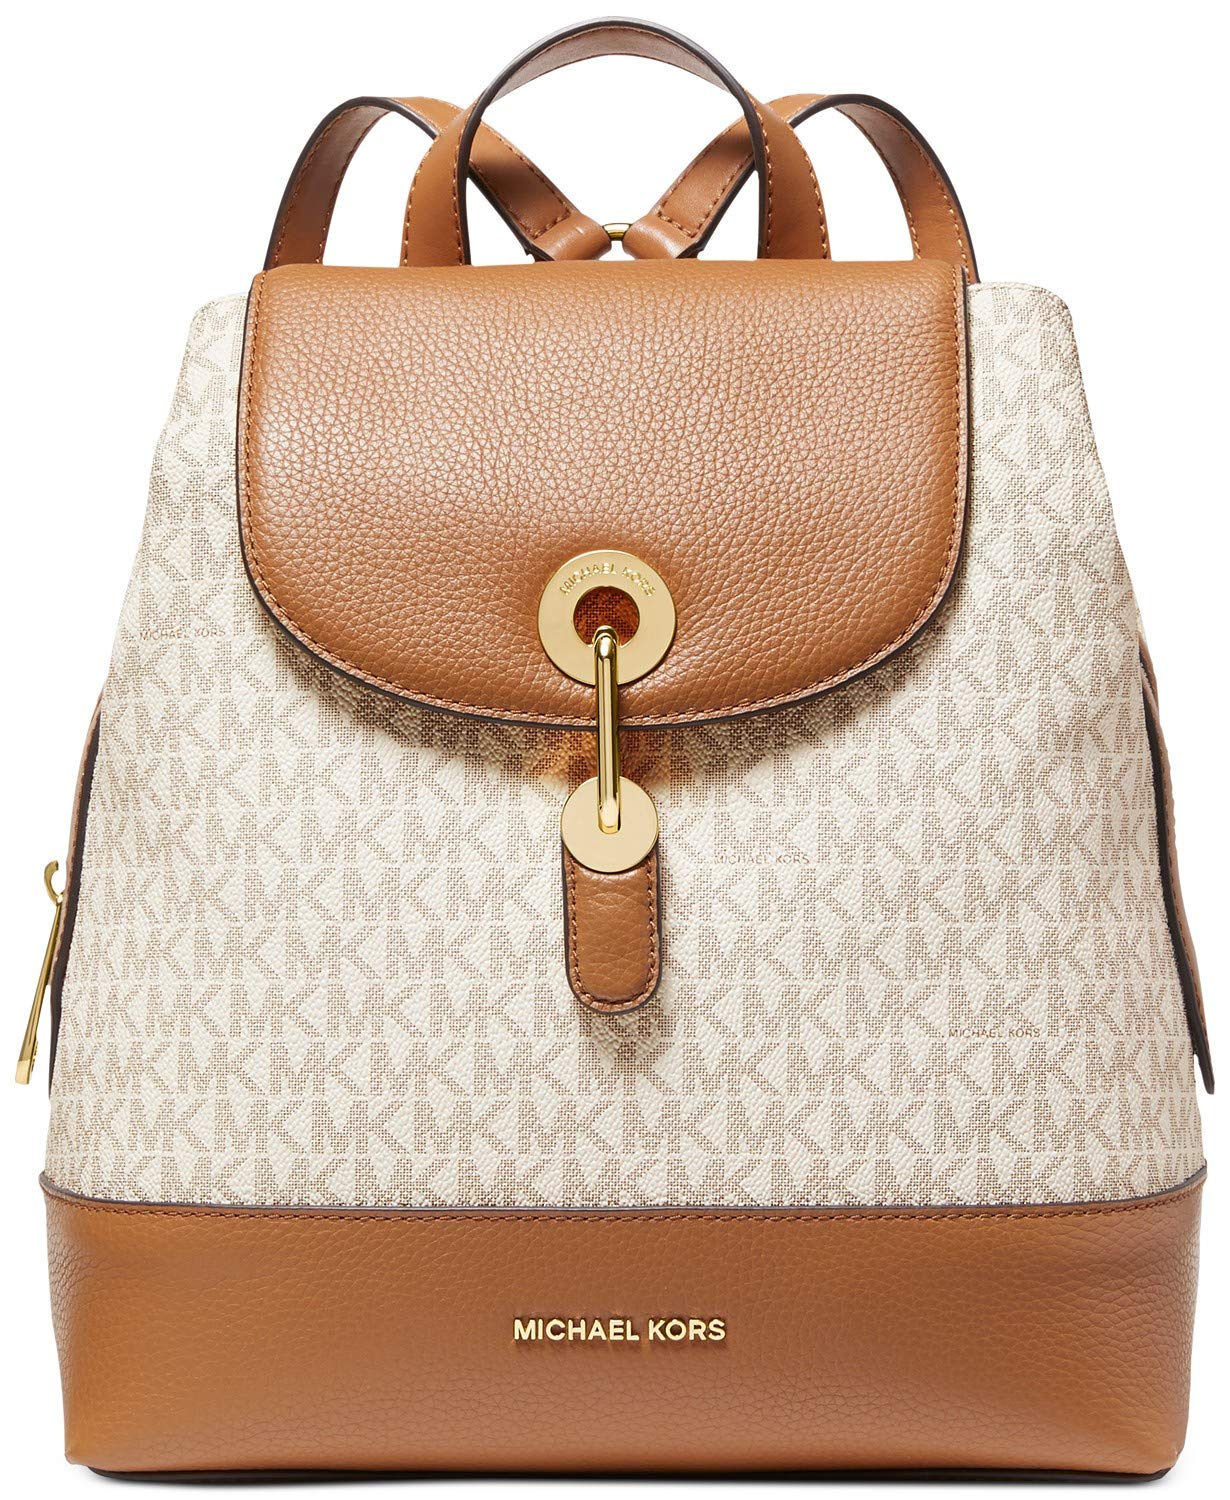 Michael Kors Raven Leather Backpack  Backpacks  Clothing  Accessories   Shop The Exchange